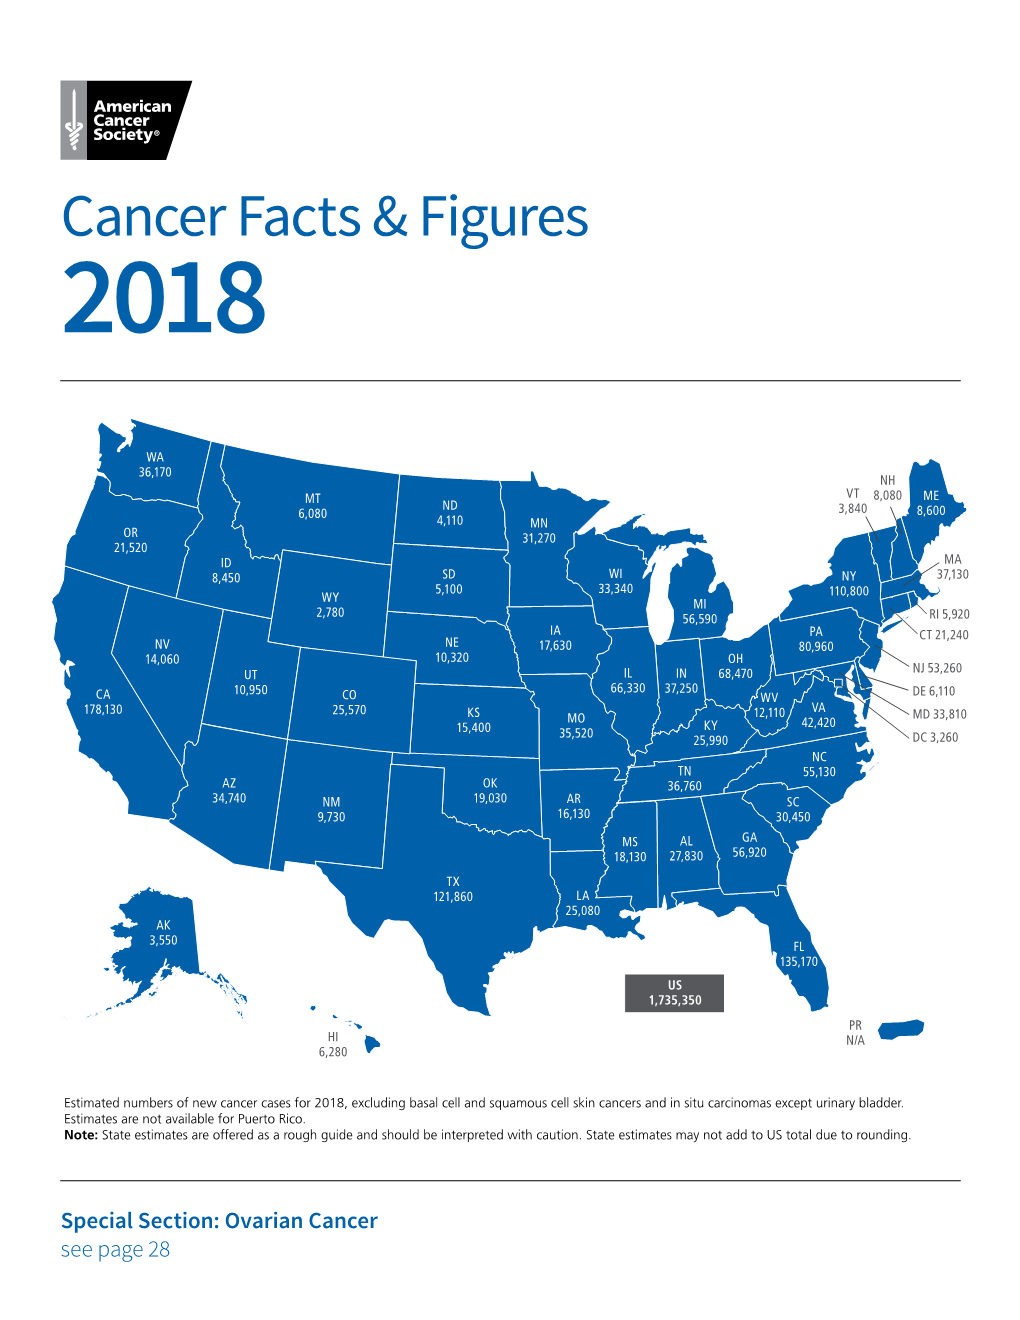 Cancer Facts & Figures 2018